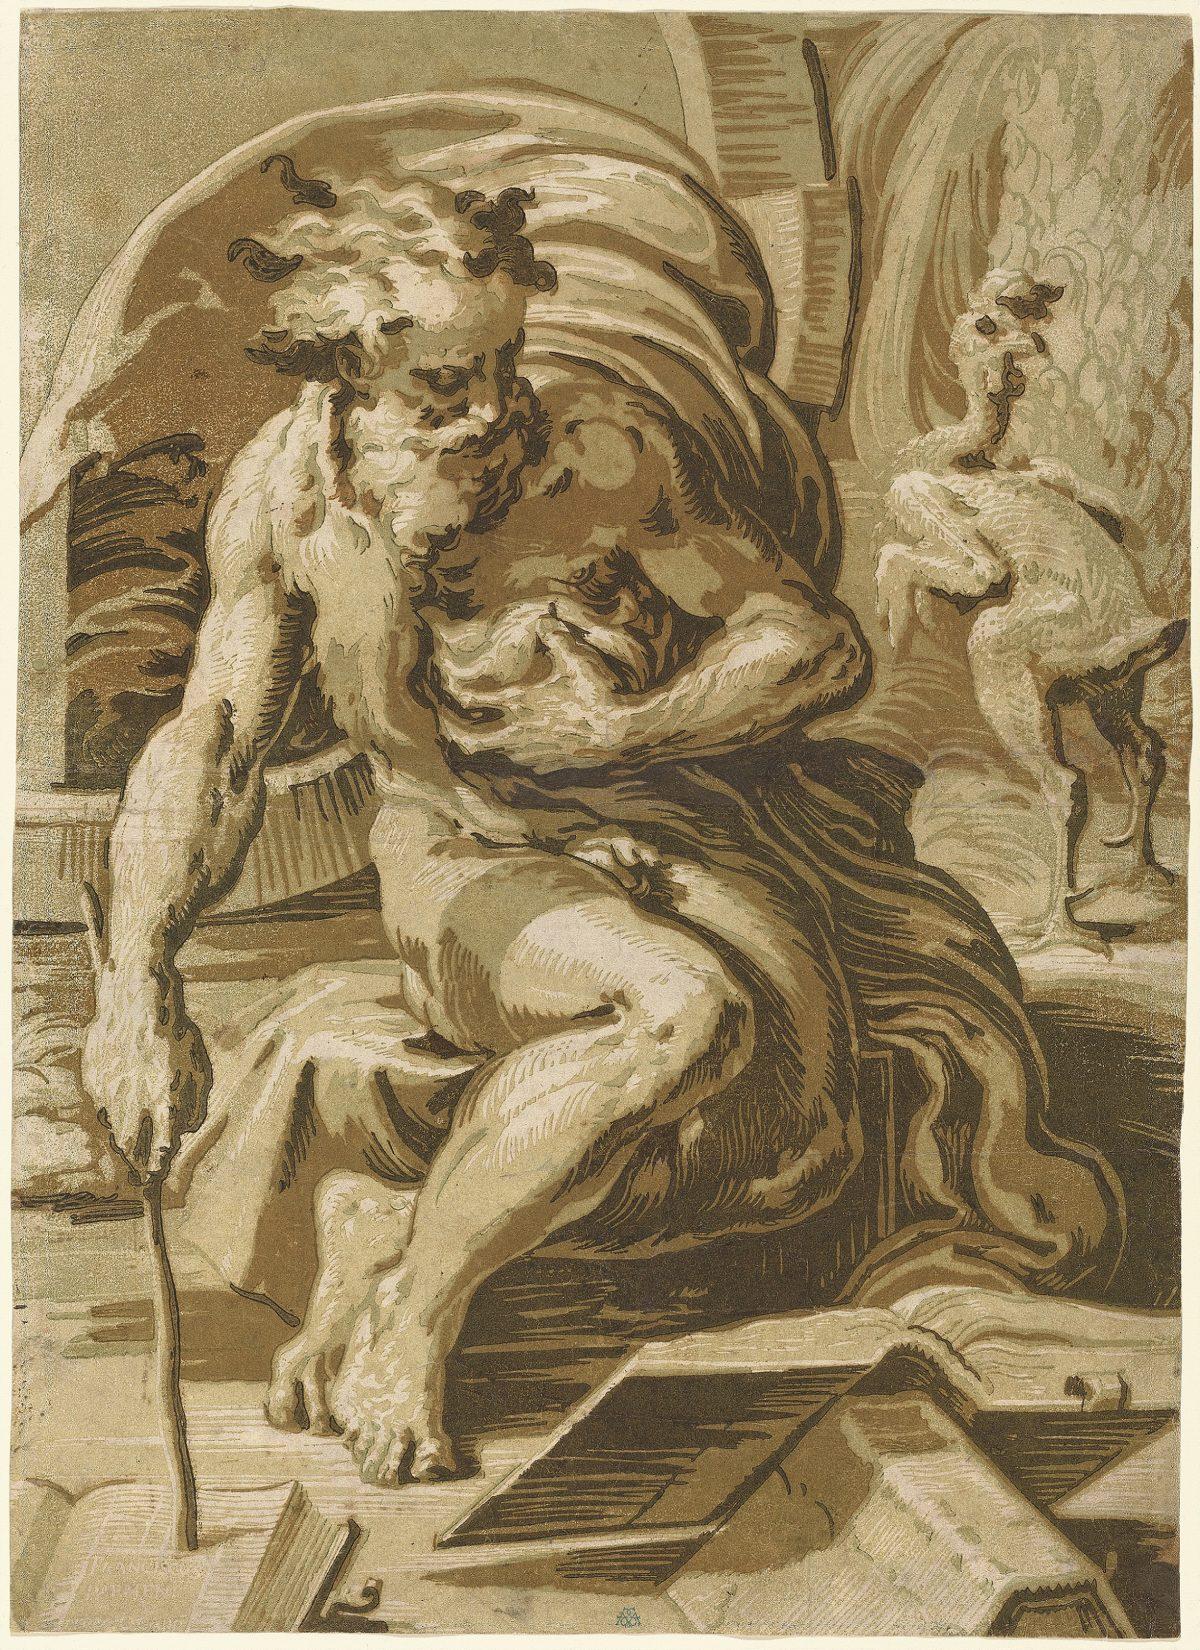 “Diogenes,” circa 1527–1530, by Ugo da Carpi, after Parmigianino. Chiaroscuro woodcut from four blocks in light green, medium green, brown, and dark brown, state iii/iii, 18 7/8 inches by 13 3/8 inches. Pepita Milmore Memorial Fund. (National Gallery of Art)